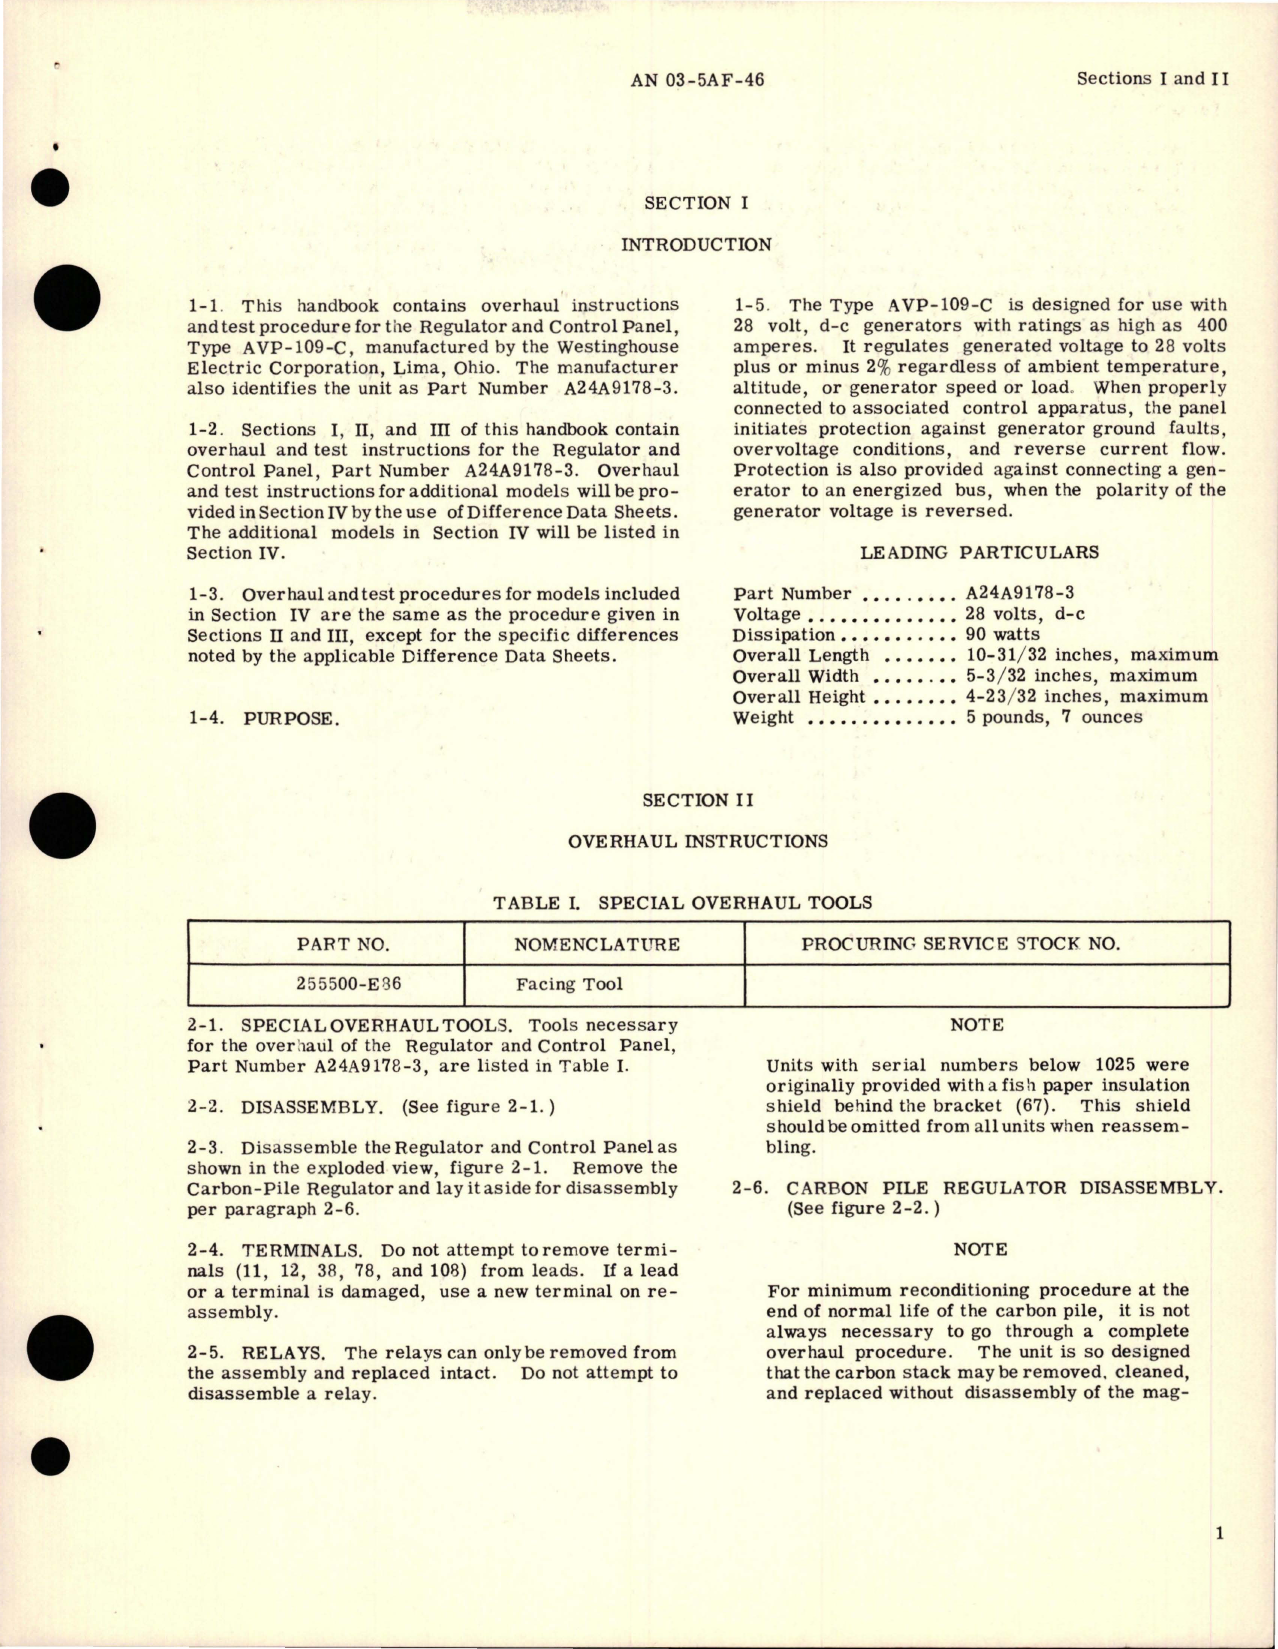 Sample page 5 from AirCorps Library document: Overhaul Instructions for Regulator and Control Panel - Type AVP-109-C 